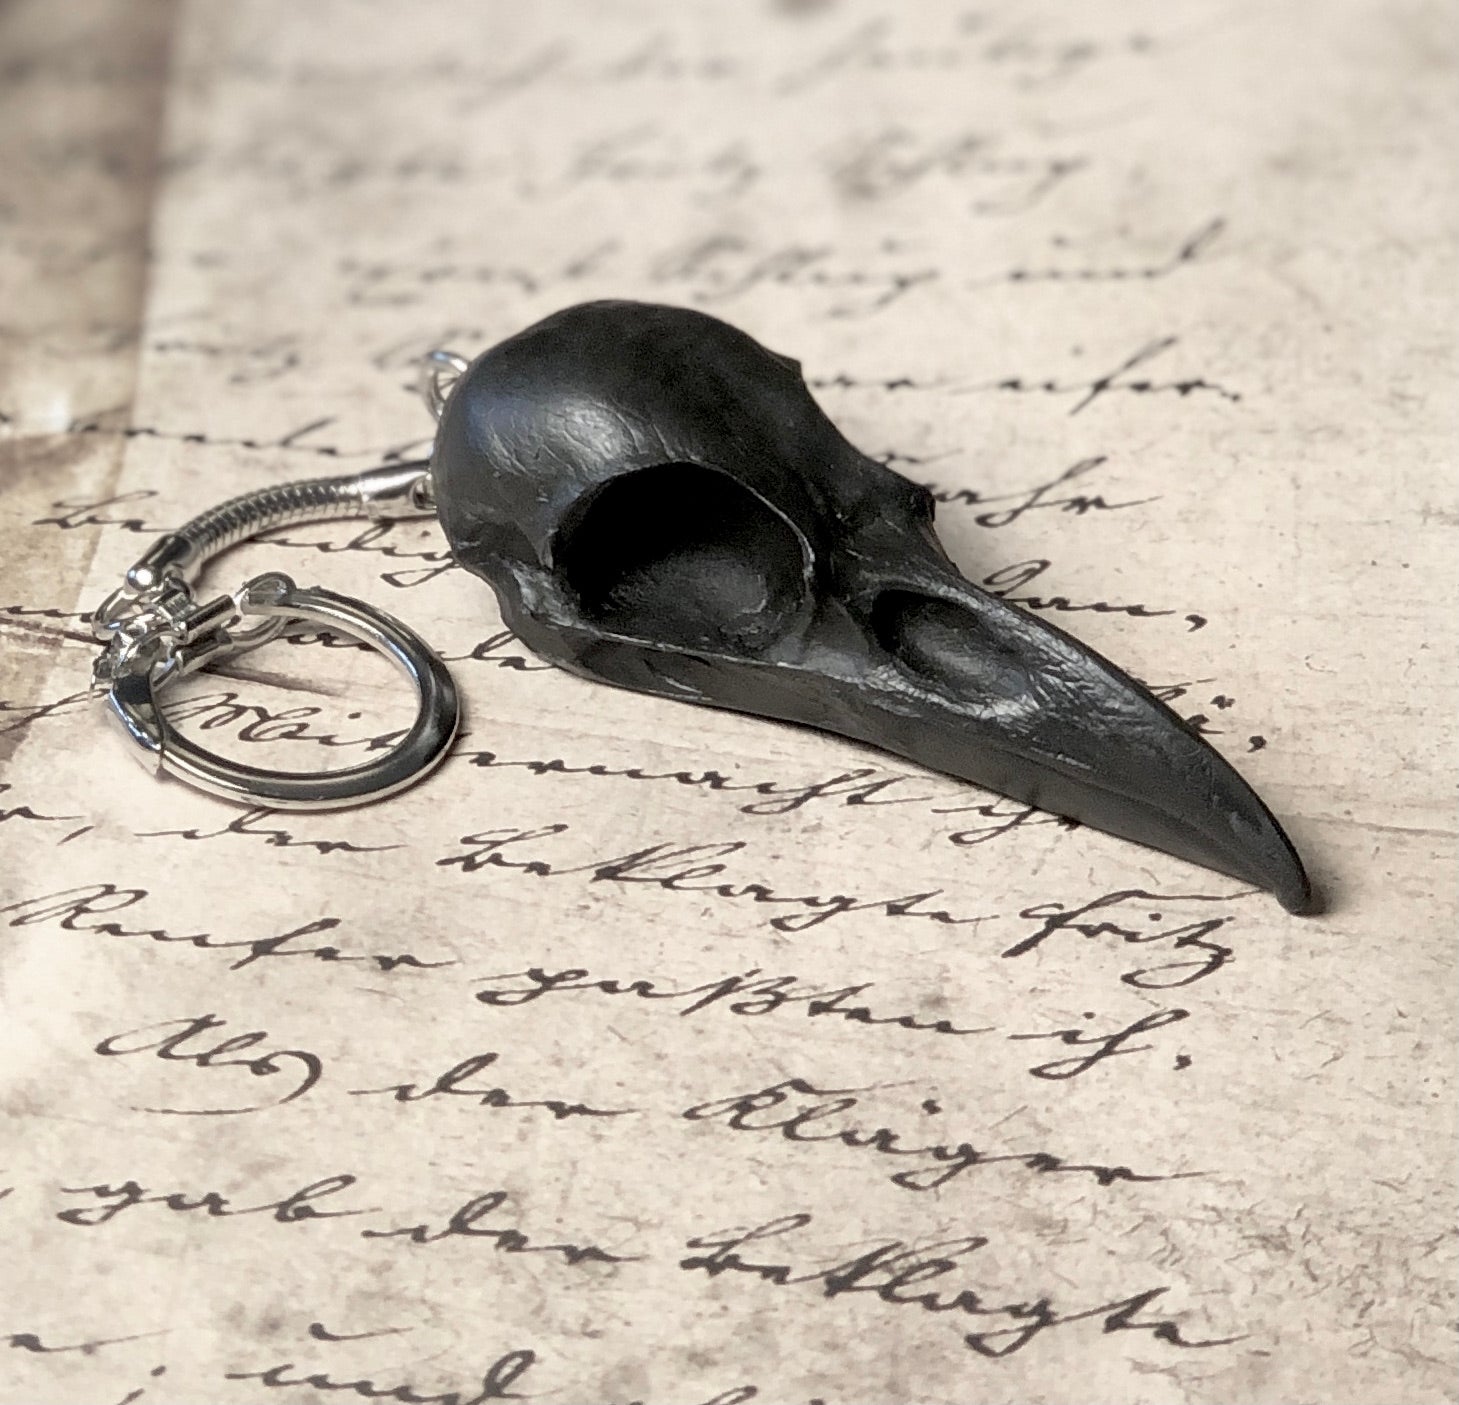 2.75 inch raven skull biker style keychain made of spooky black resin to look like a real bird skull key chain. 